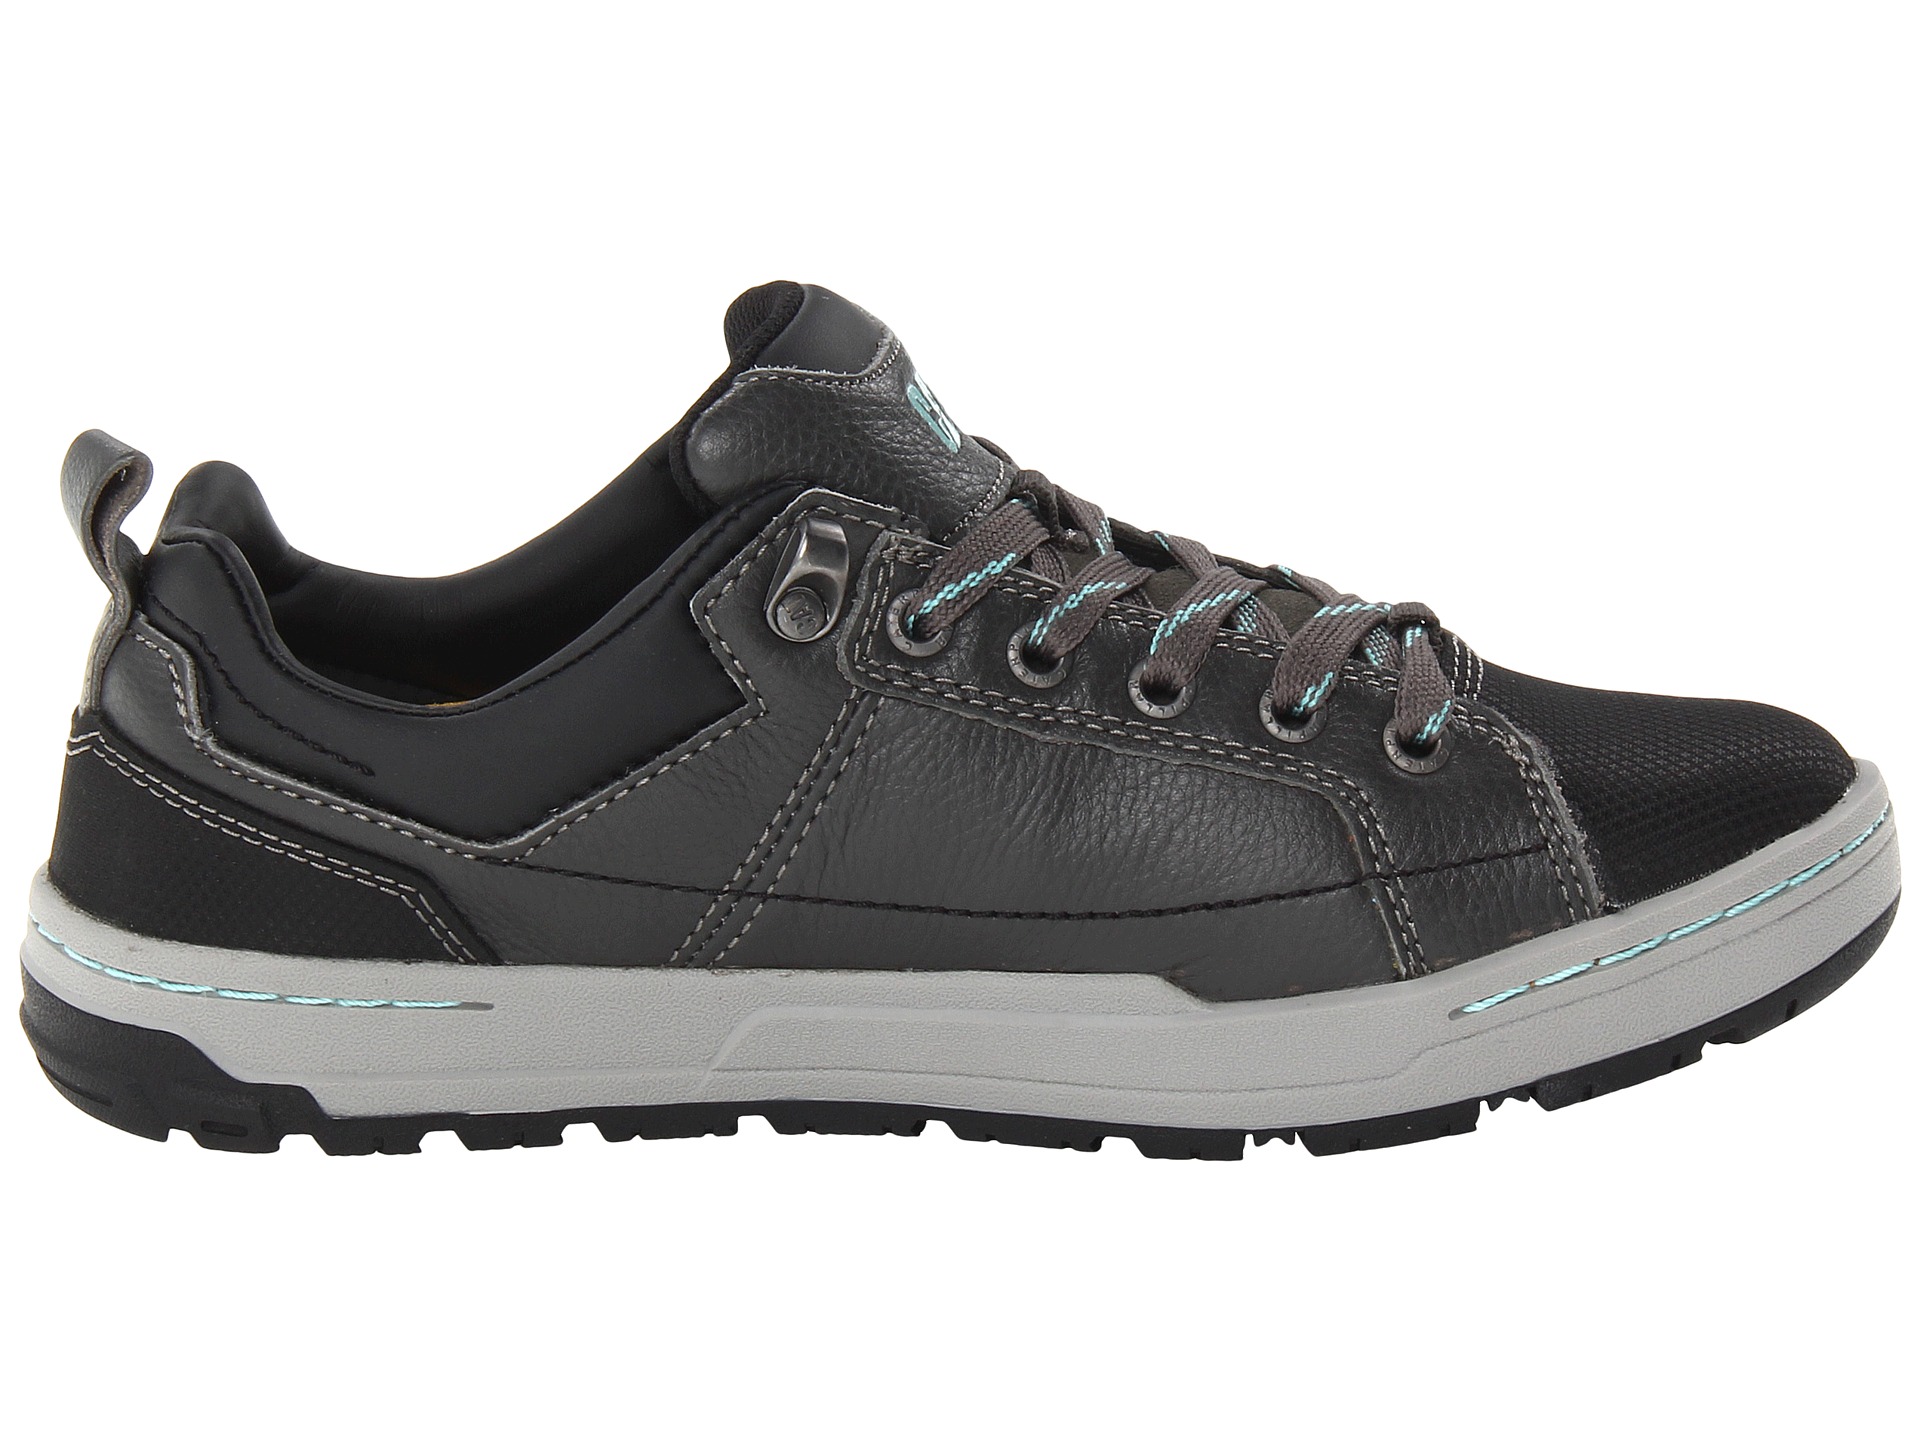 Caterpillar Brode, Shoes | Shipped Free at Zappos